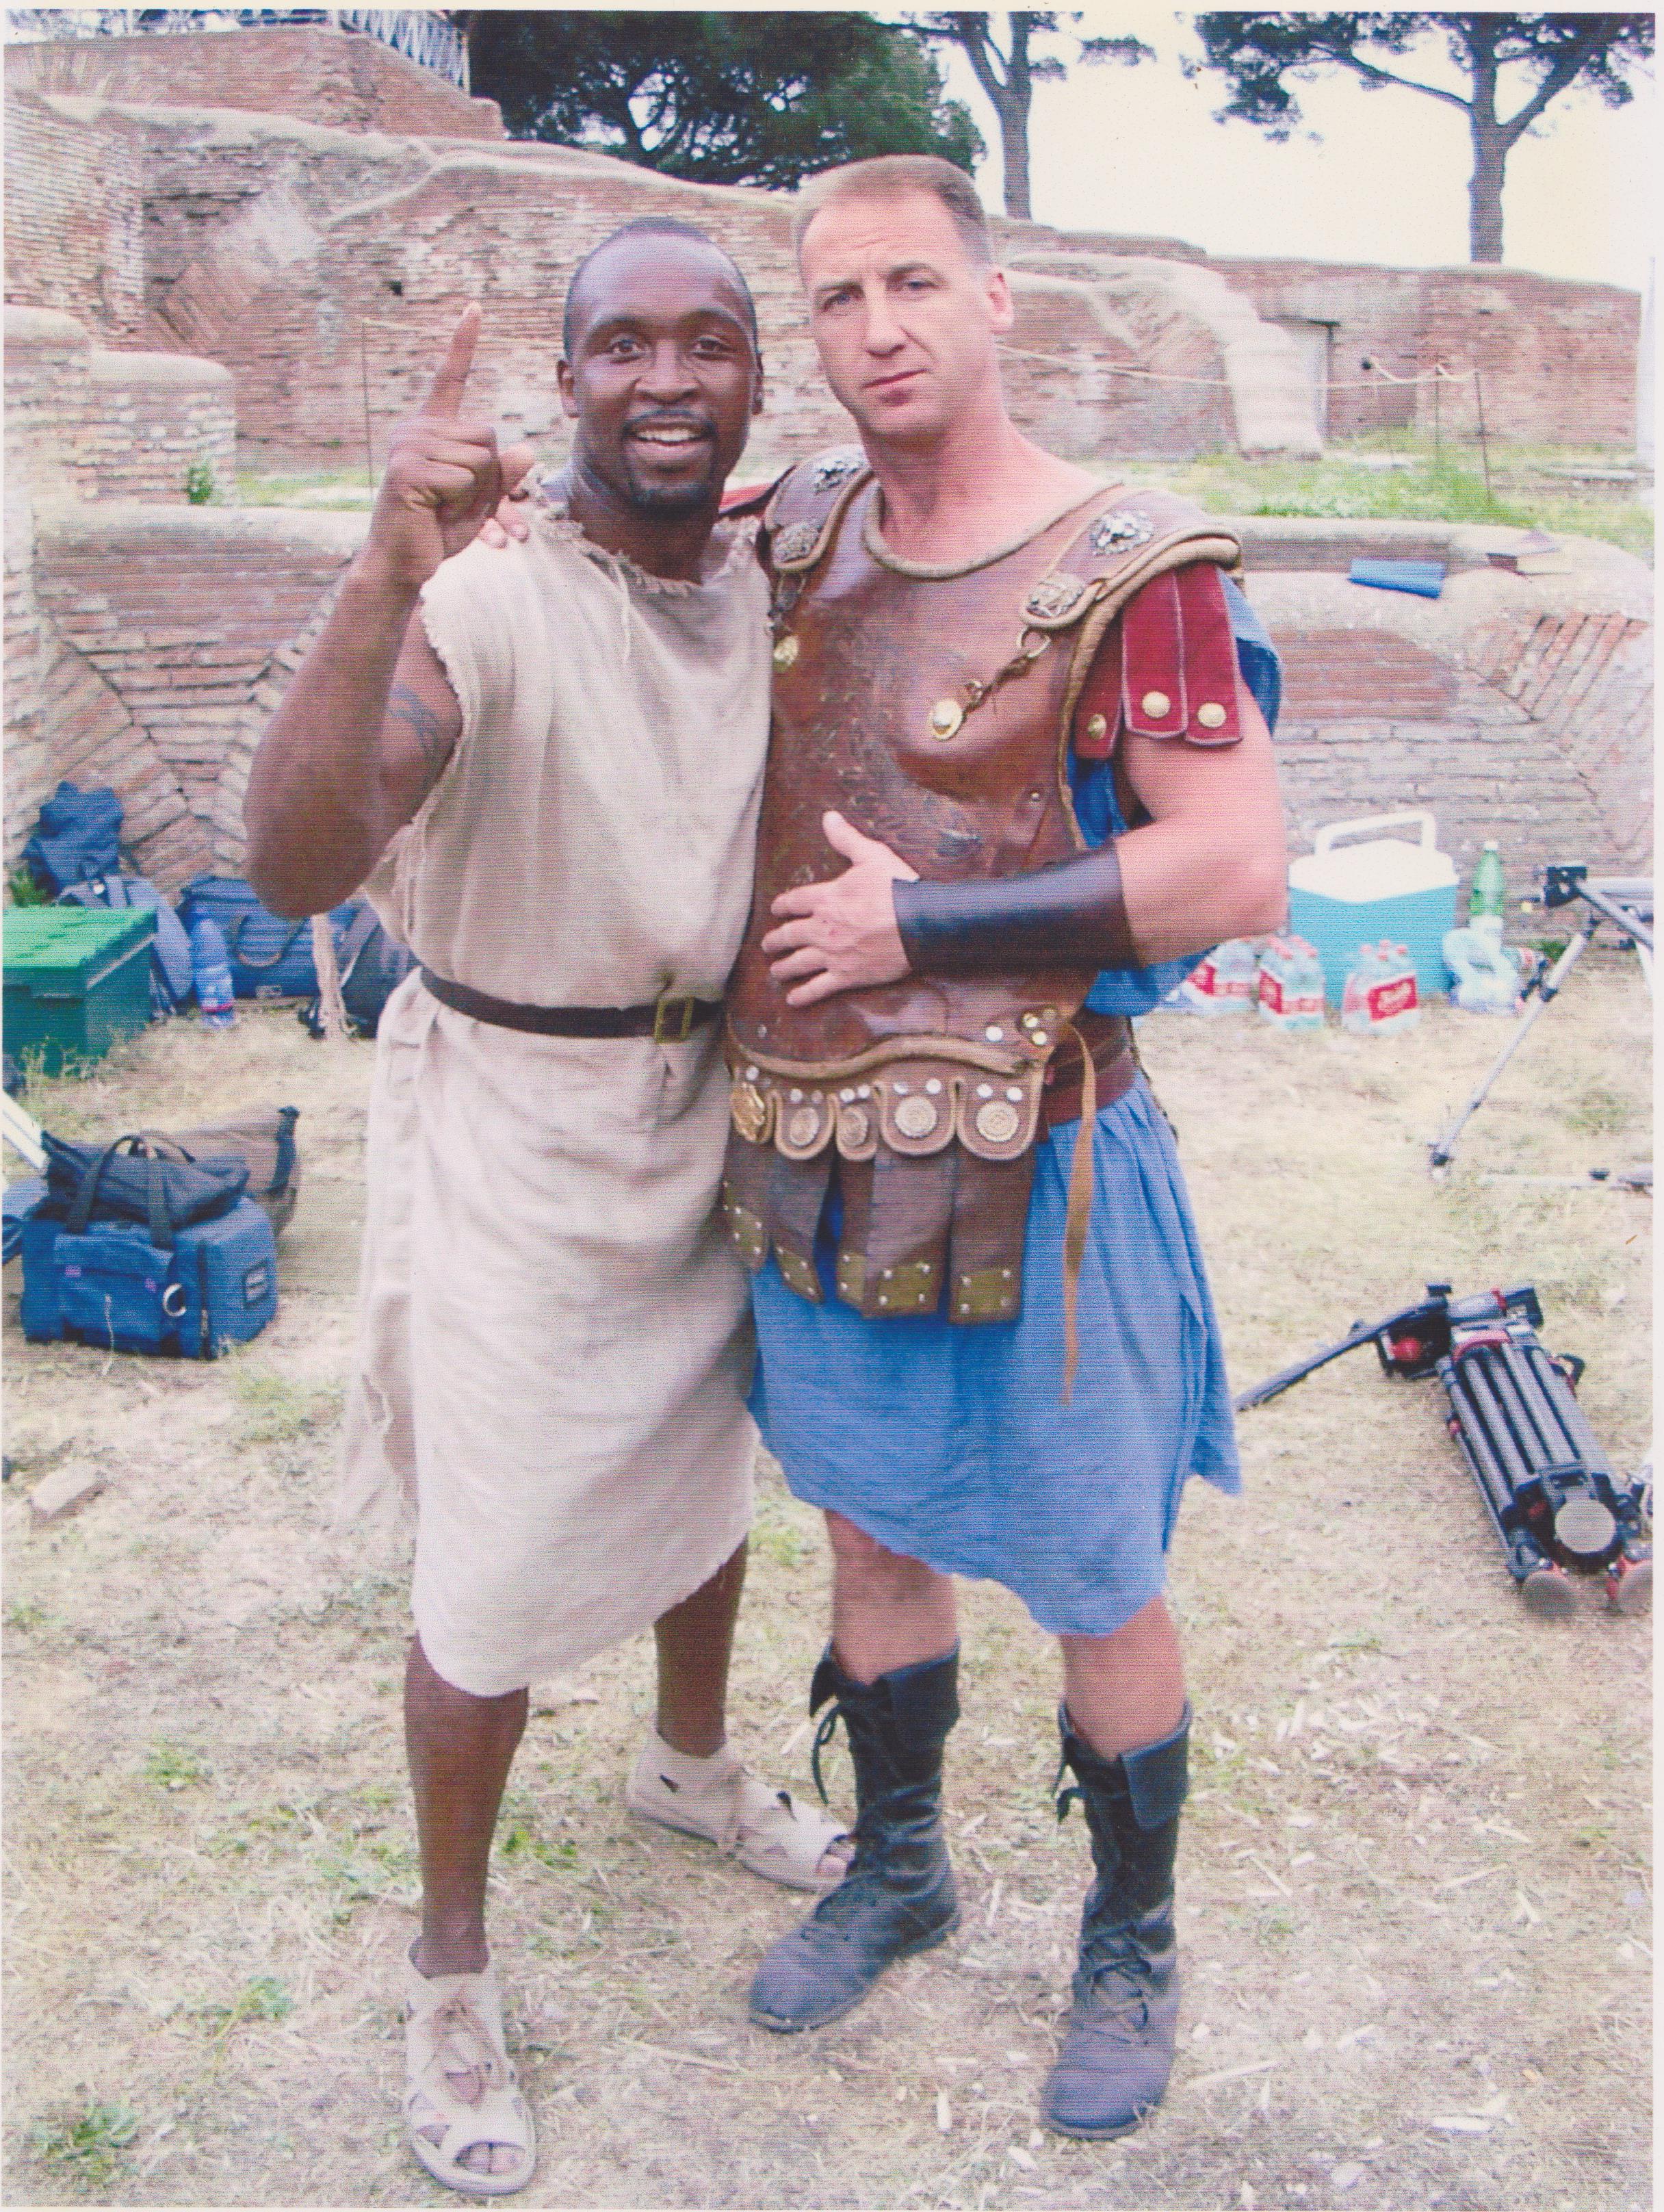 GLADIATOR-BENN VERSUS EUBANK I WAS CHIEF INSTRUCTOR FOR SWORD AND MACE TO BOTH COMBATANTS